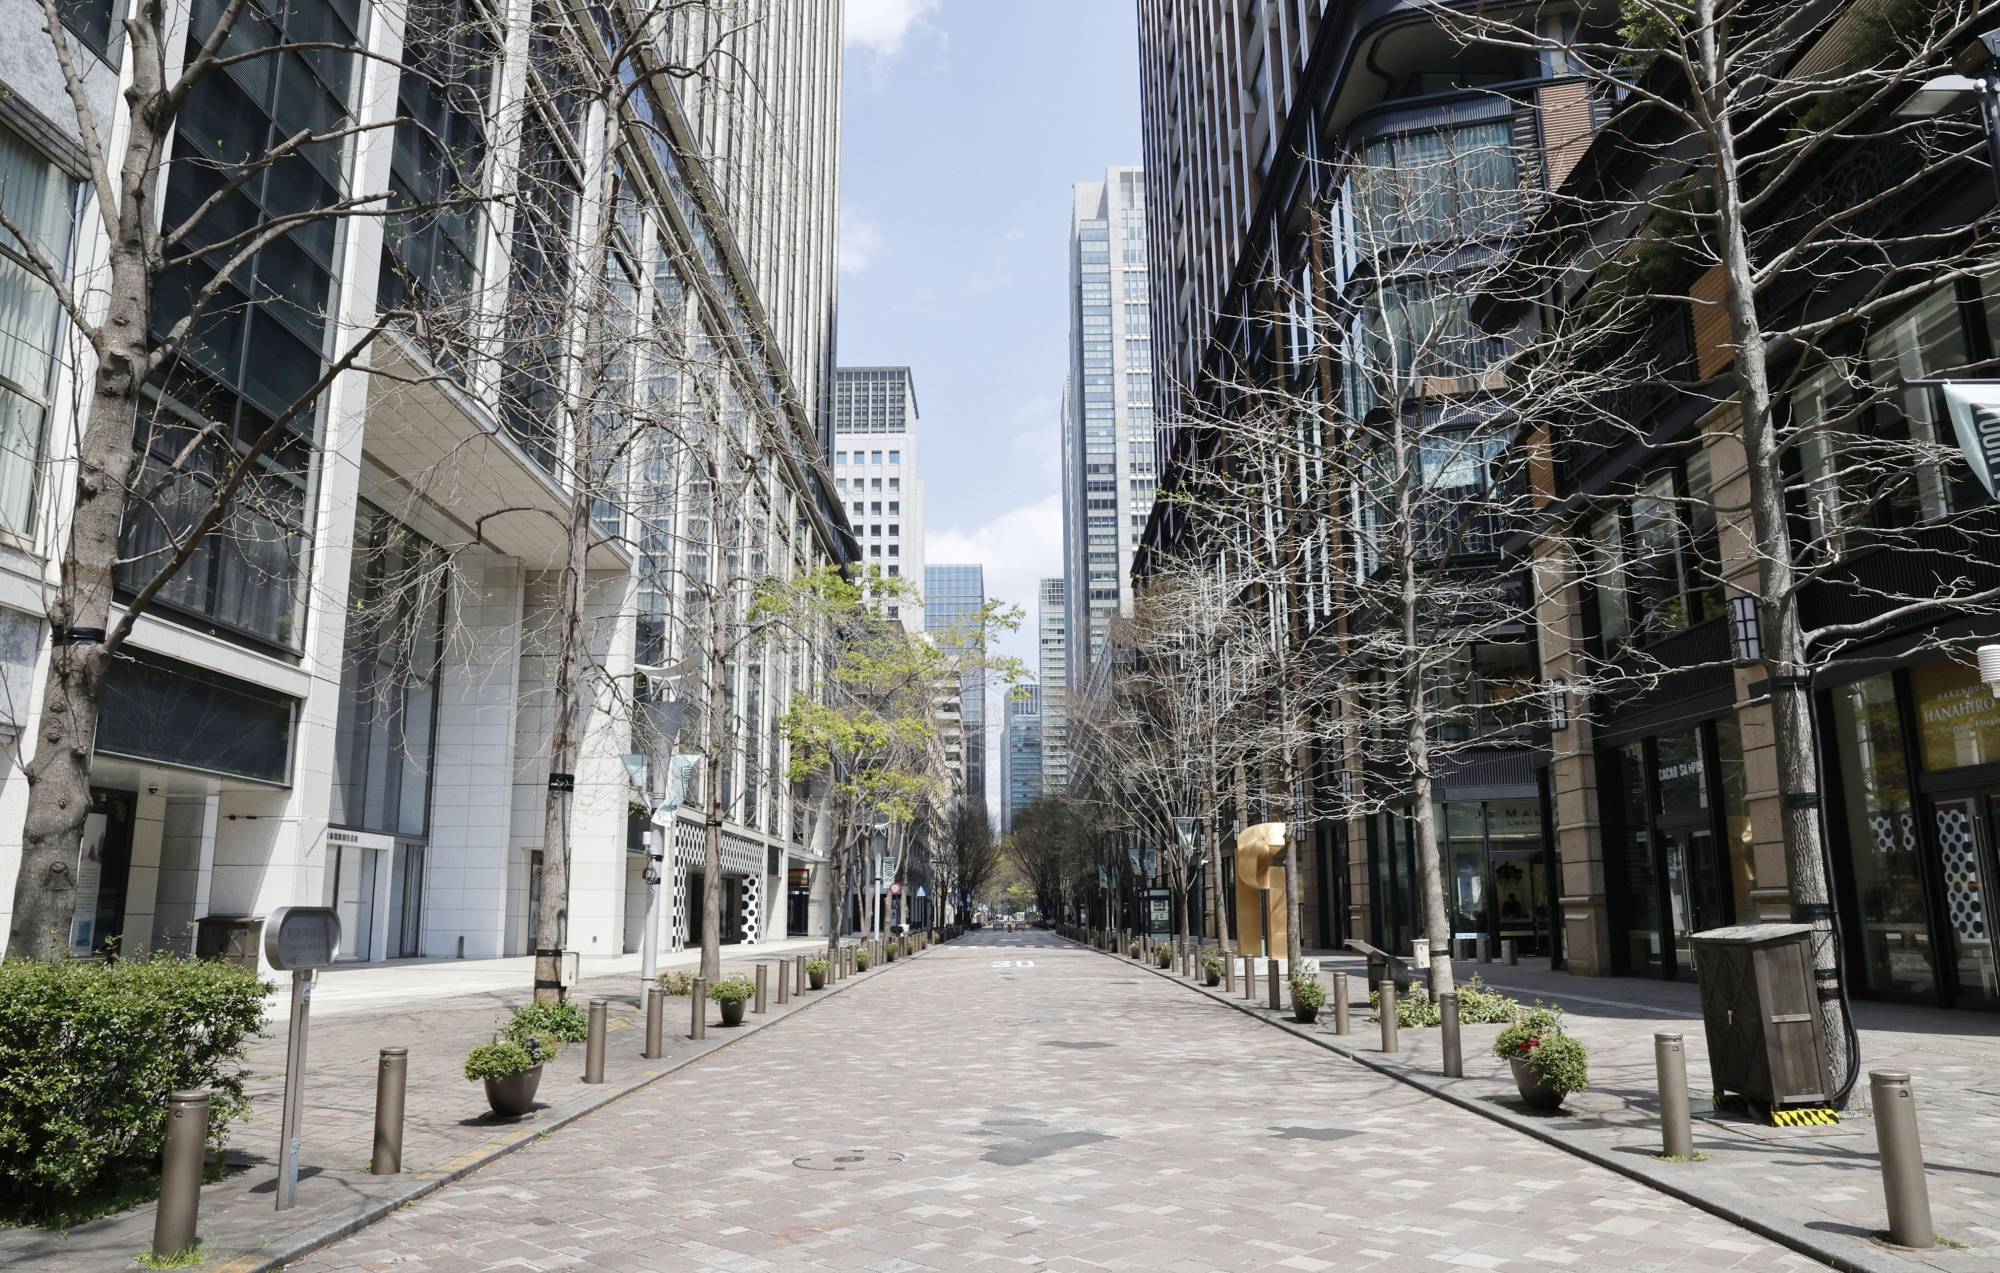 A street in the Marunouchi business district of Tokyo, where many foreign business people work and do business, stands empty amid the COVID-19 pandemic. | KYODO　